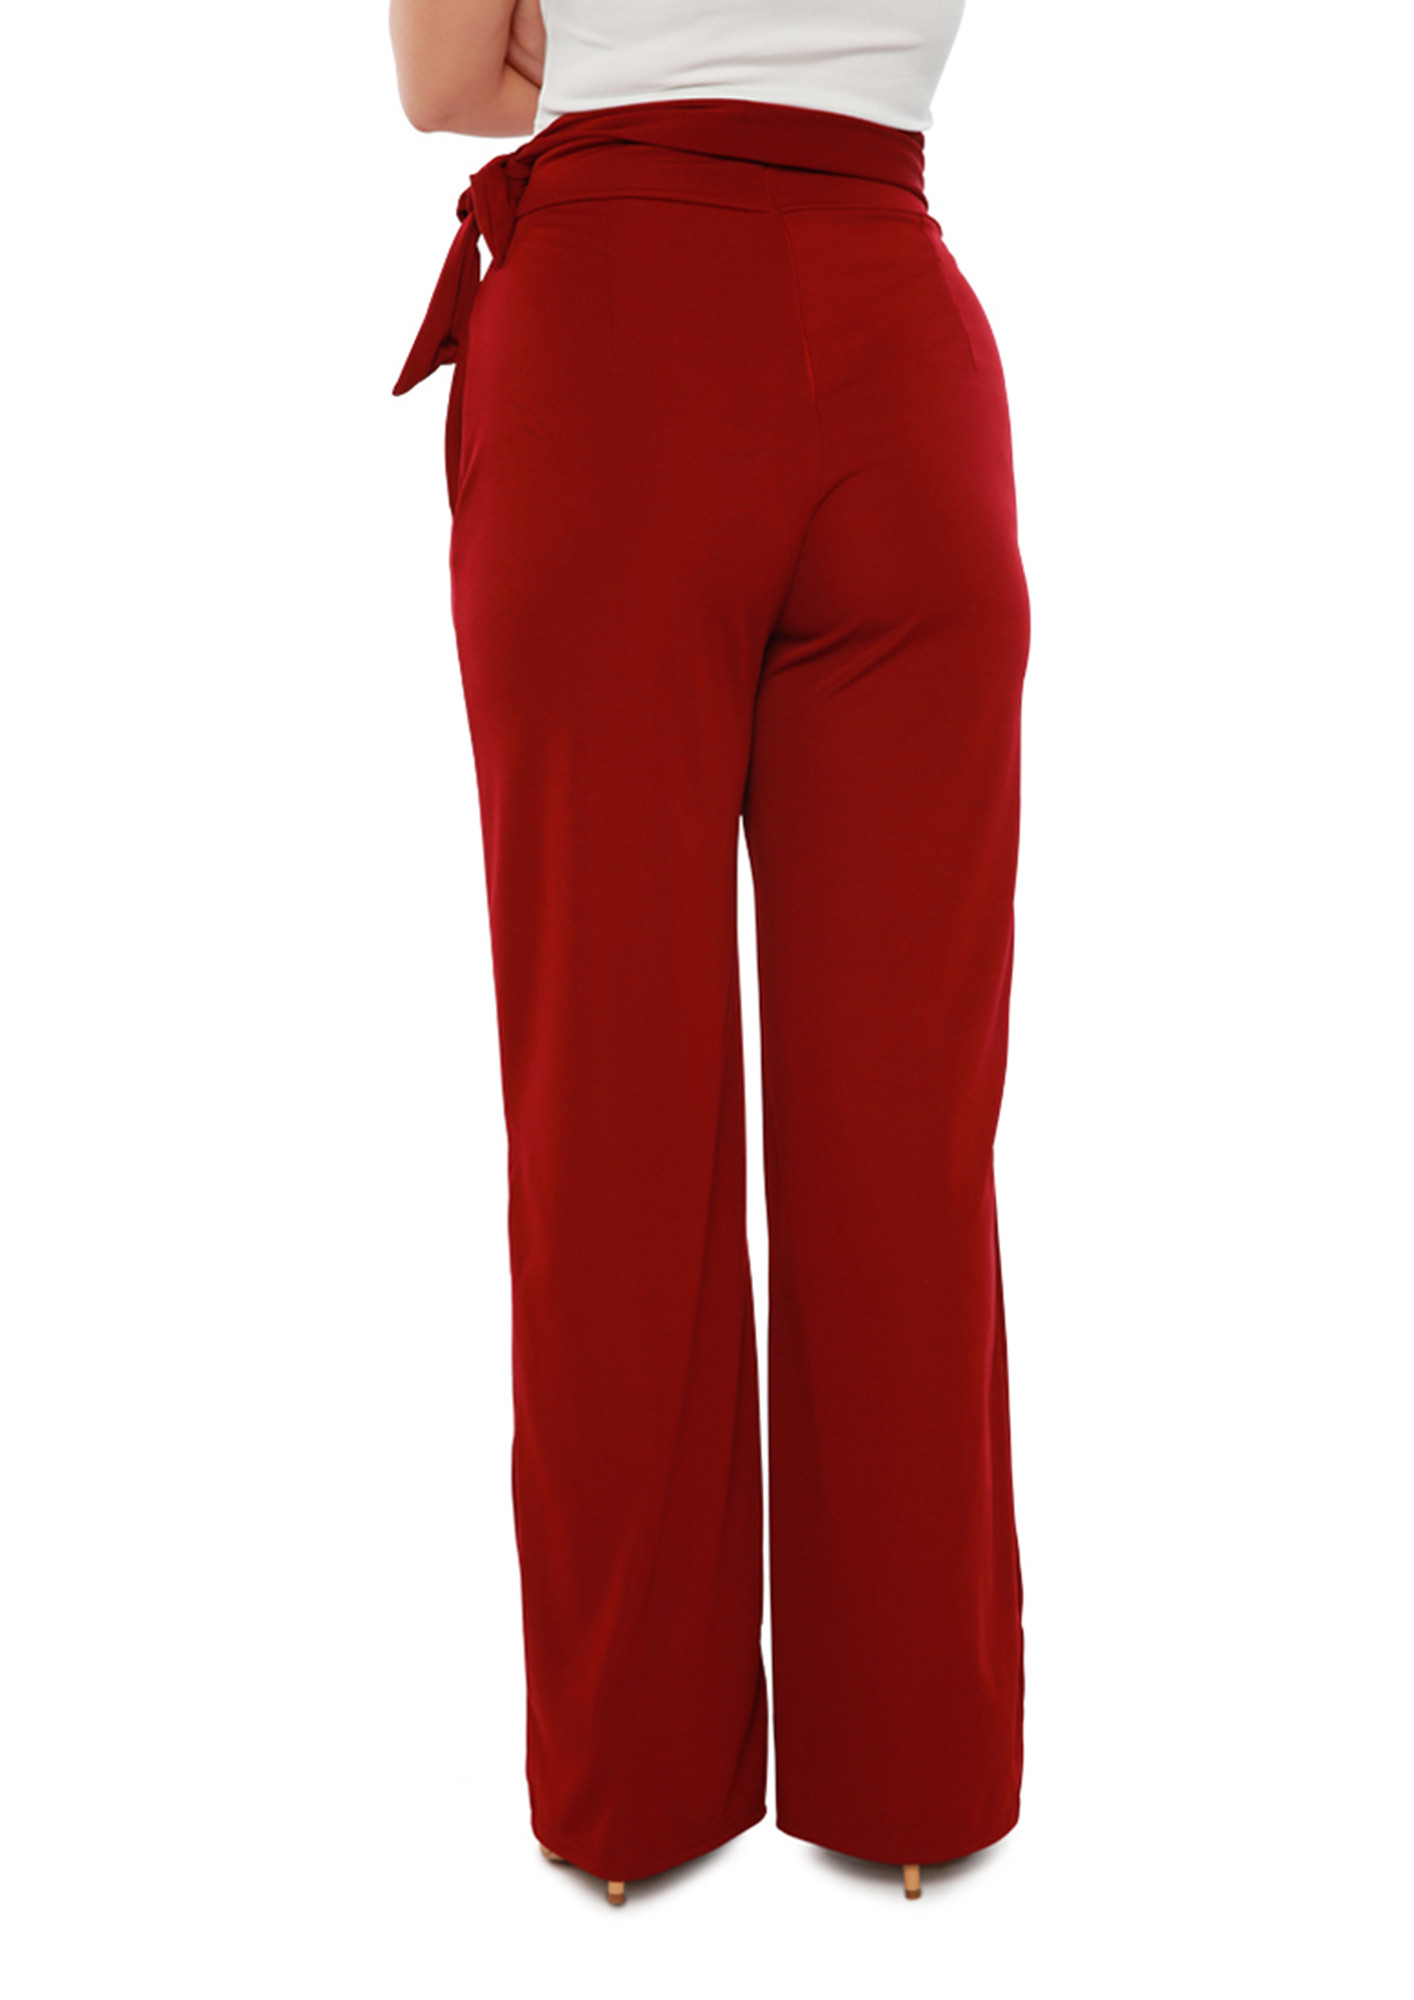 Sydne Style wears red wide leg pants for fall outfit ideas  Sydne Style